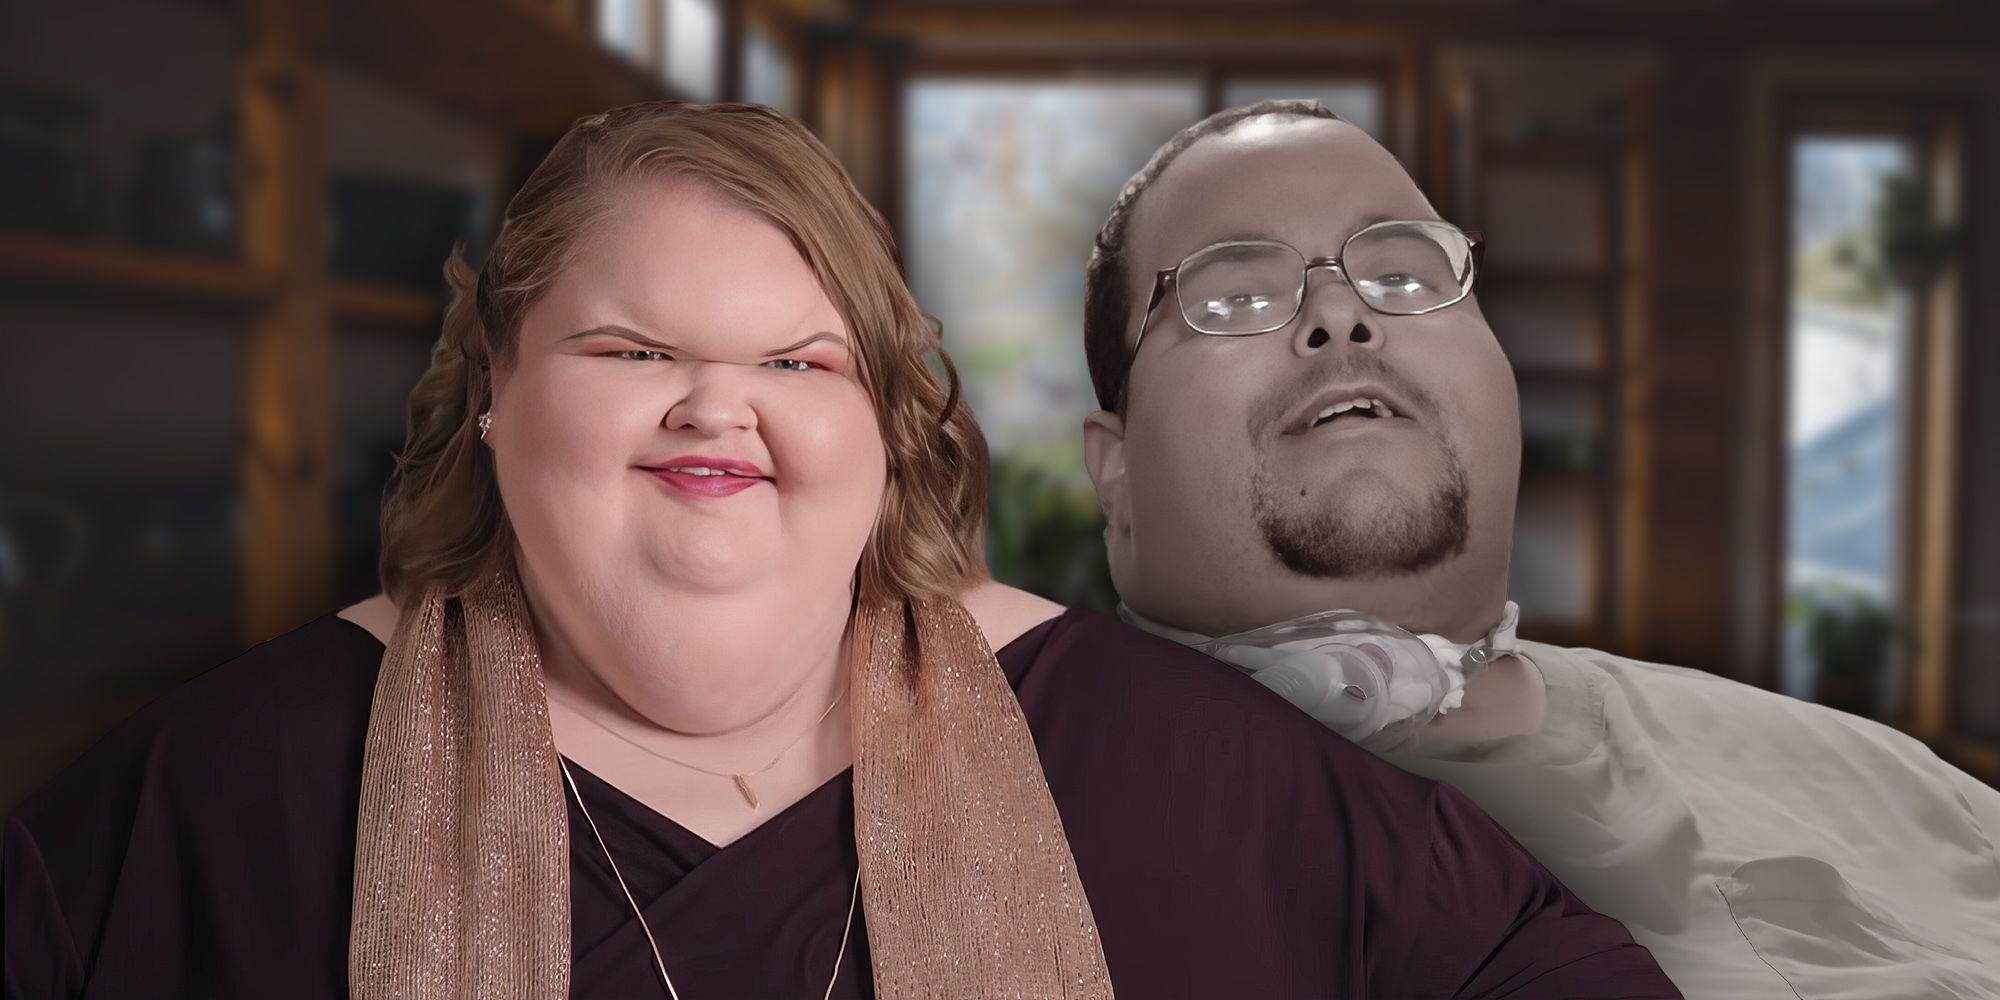 Tammy and Caleb from 1000-lb Sisters